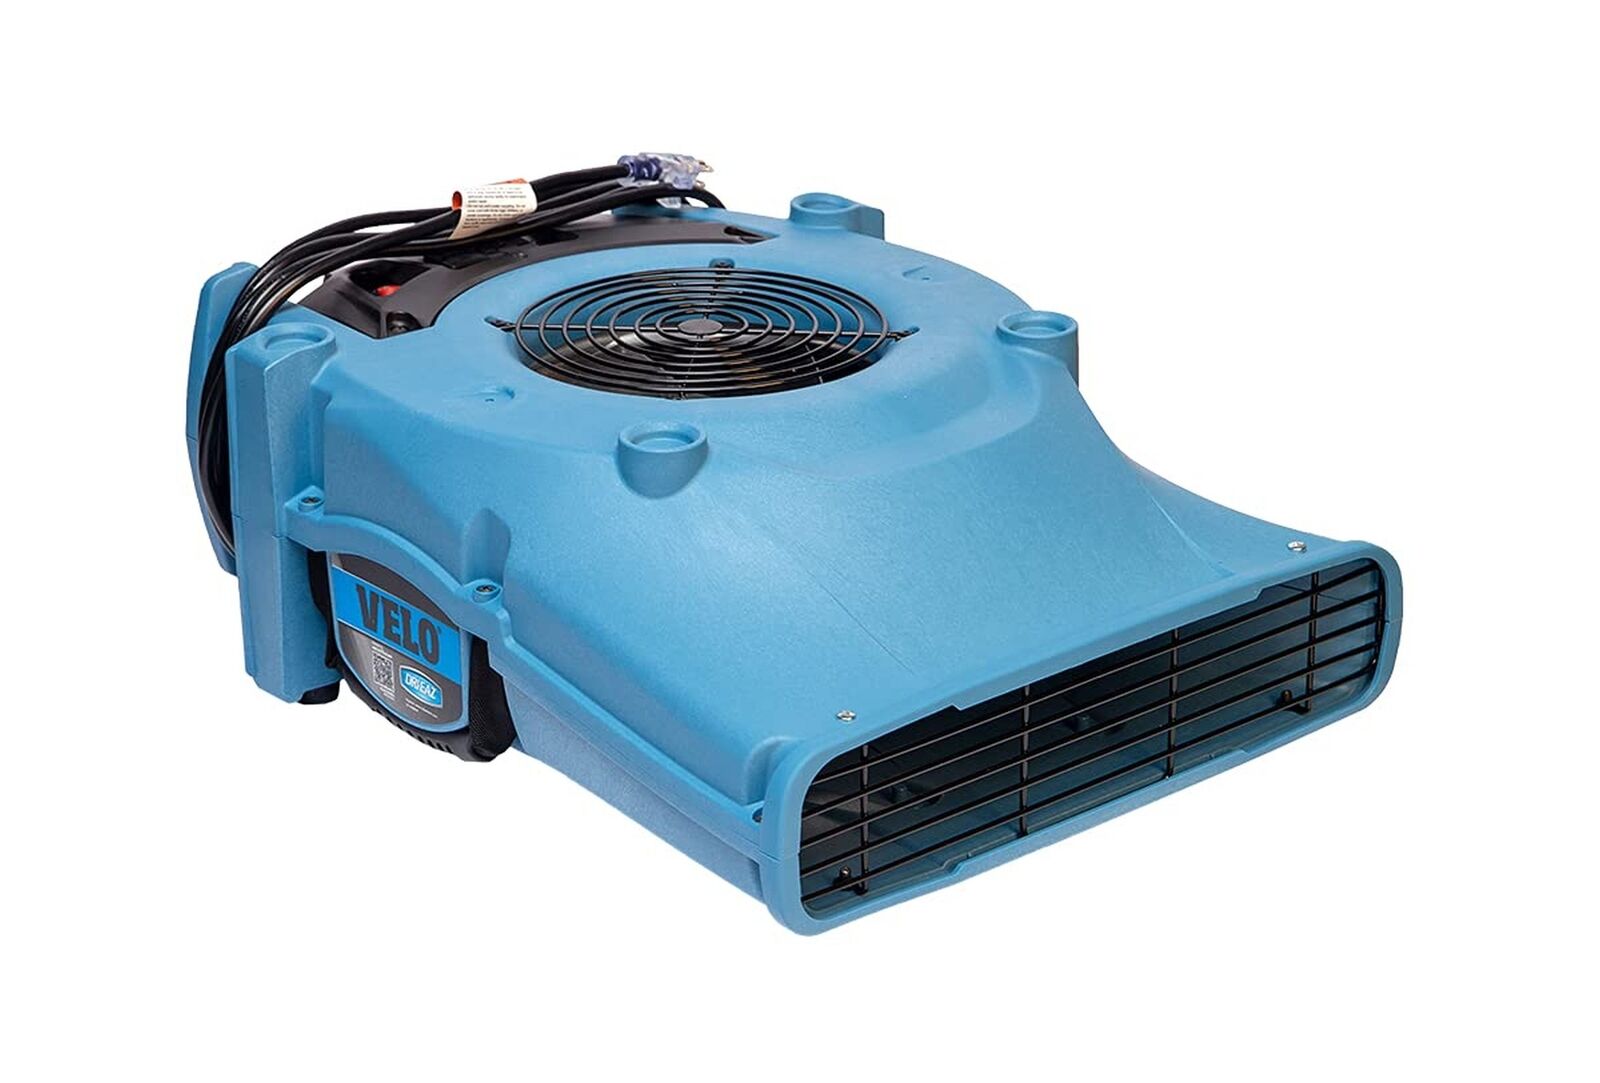 Dri Eaz Velo Air Mover Professional Water Damage Dryer for Carpets, Walls, Fl...